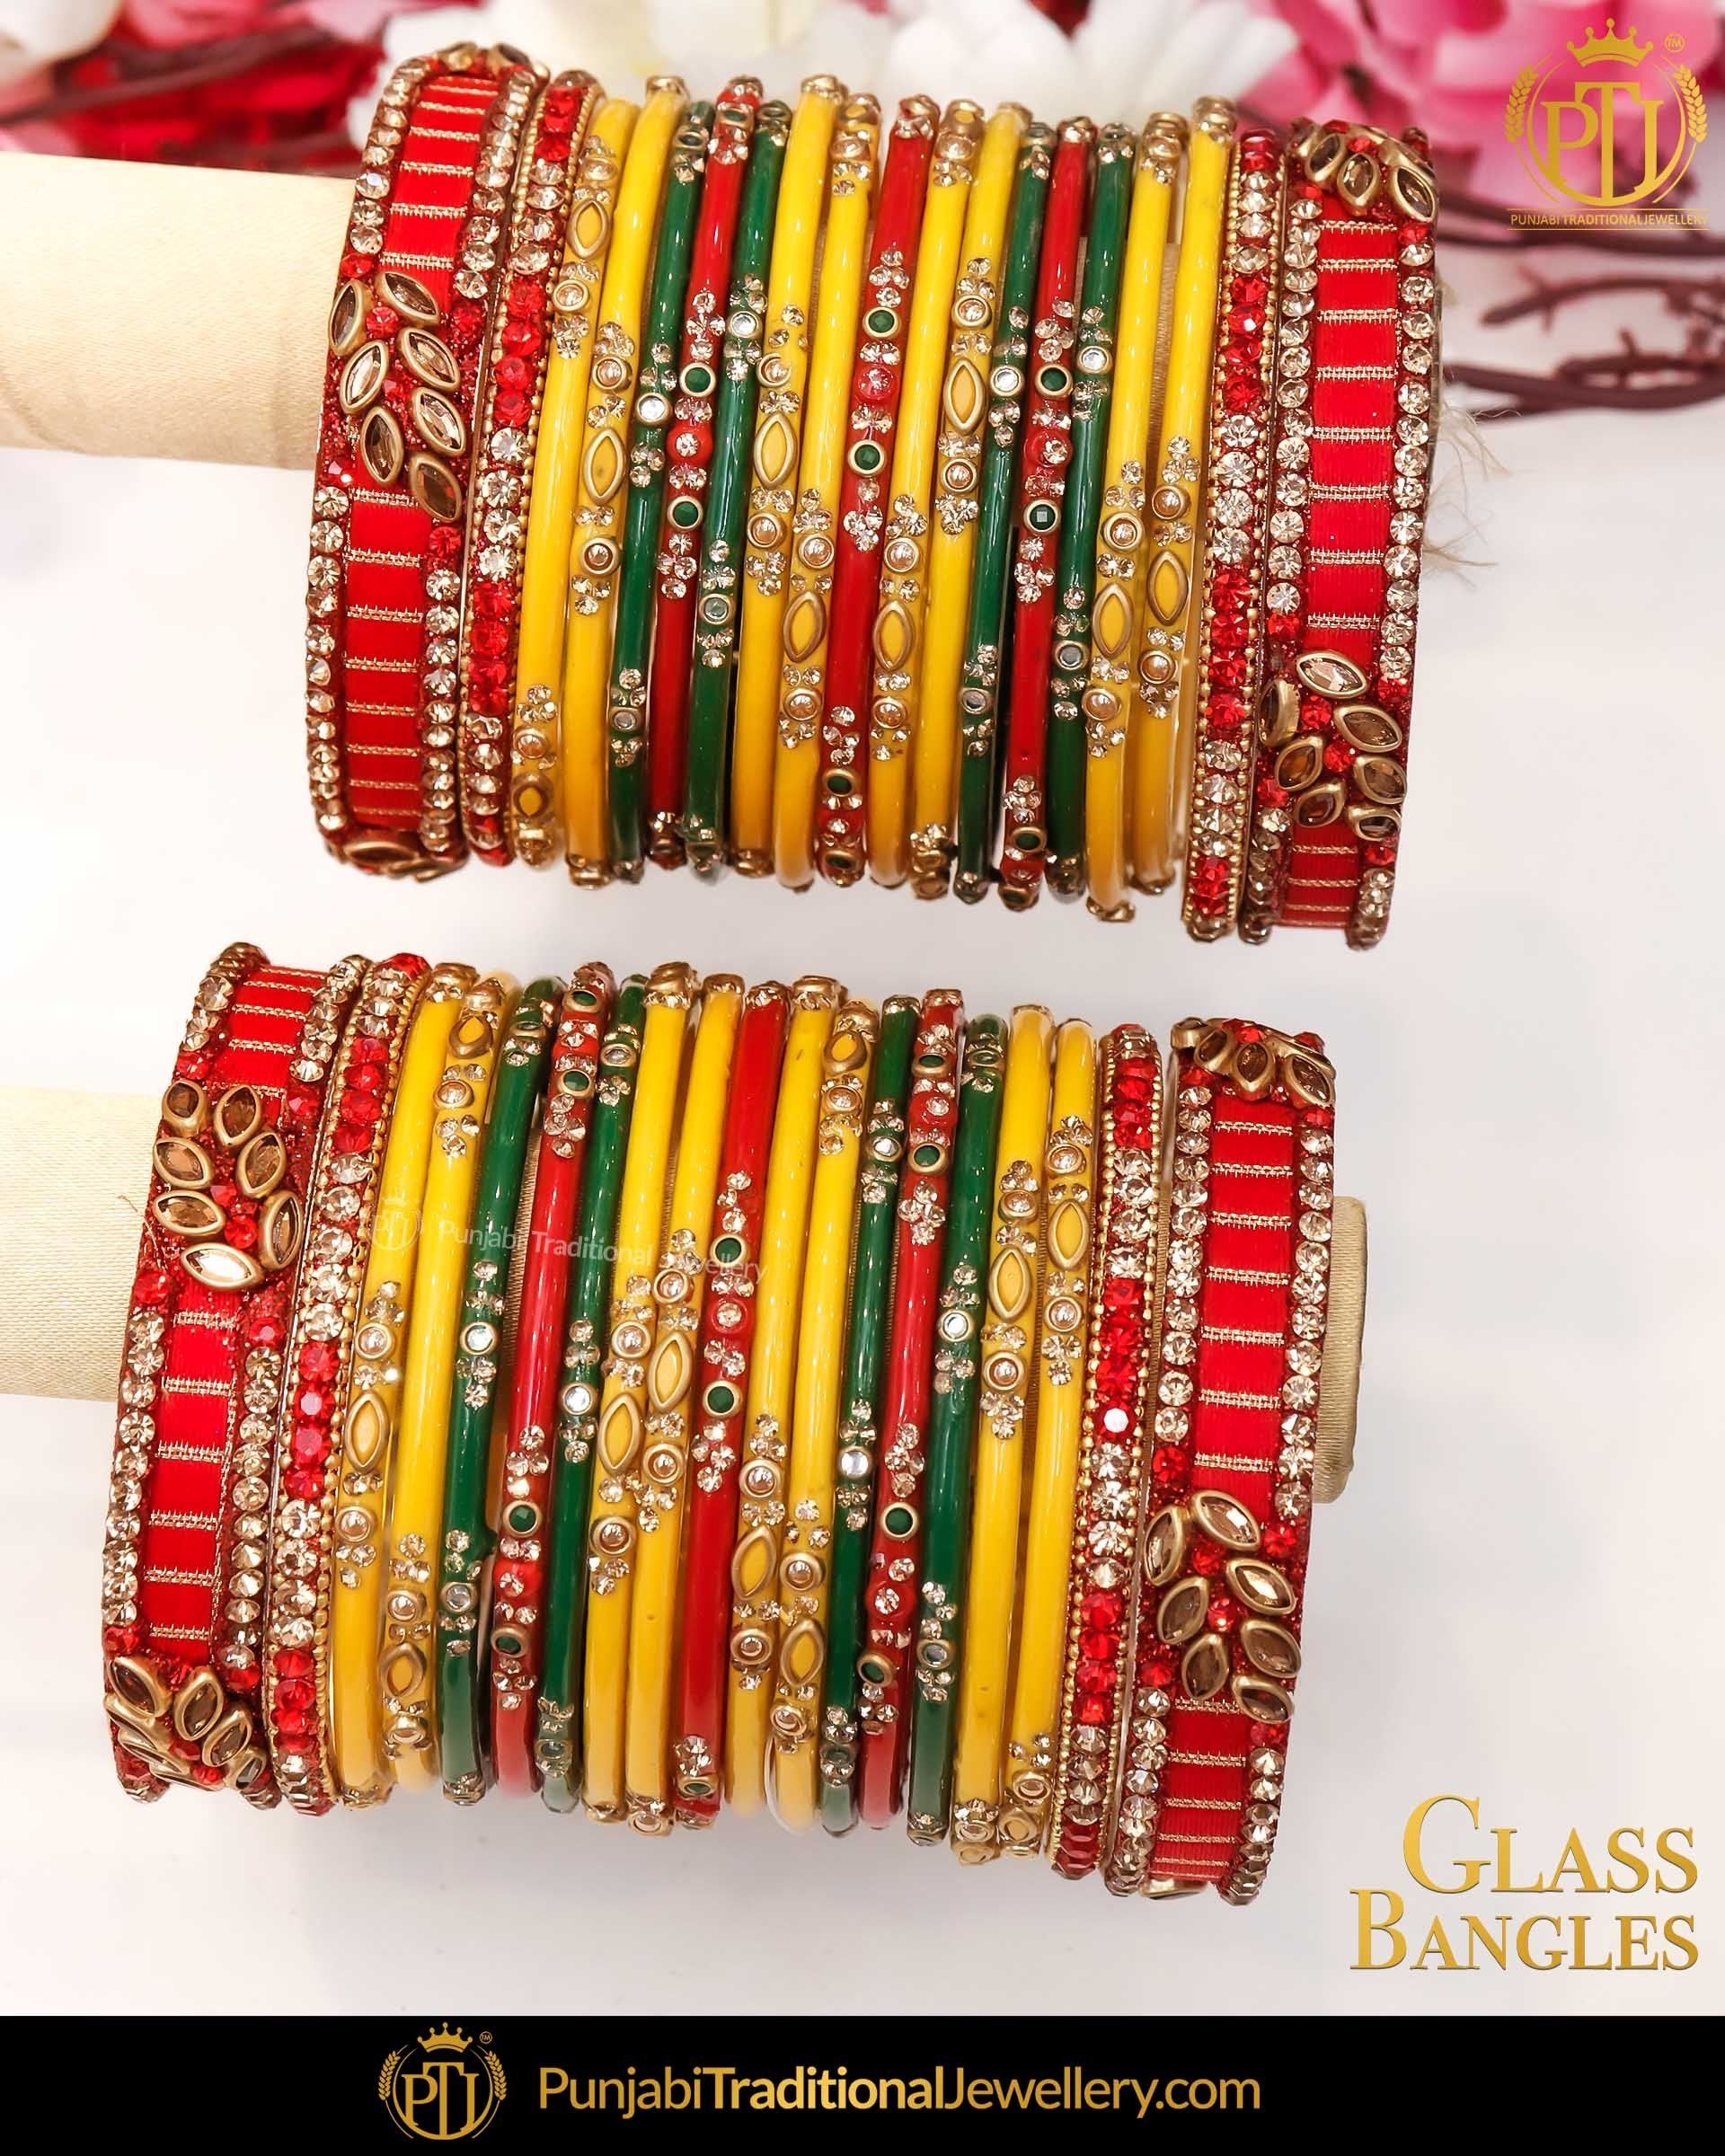 Multi (For Both Hands) Glass Bangles Set | Punjabi Traditional Jewellery Exclusive